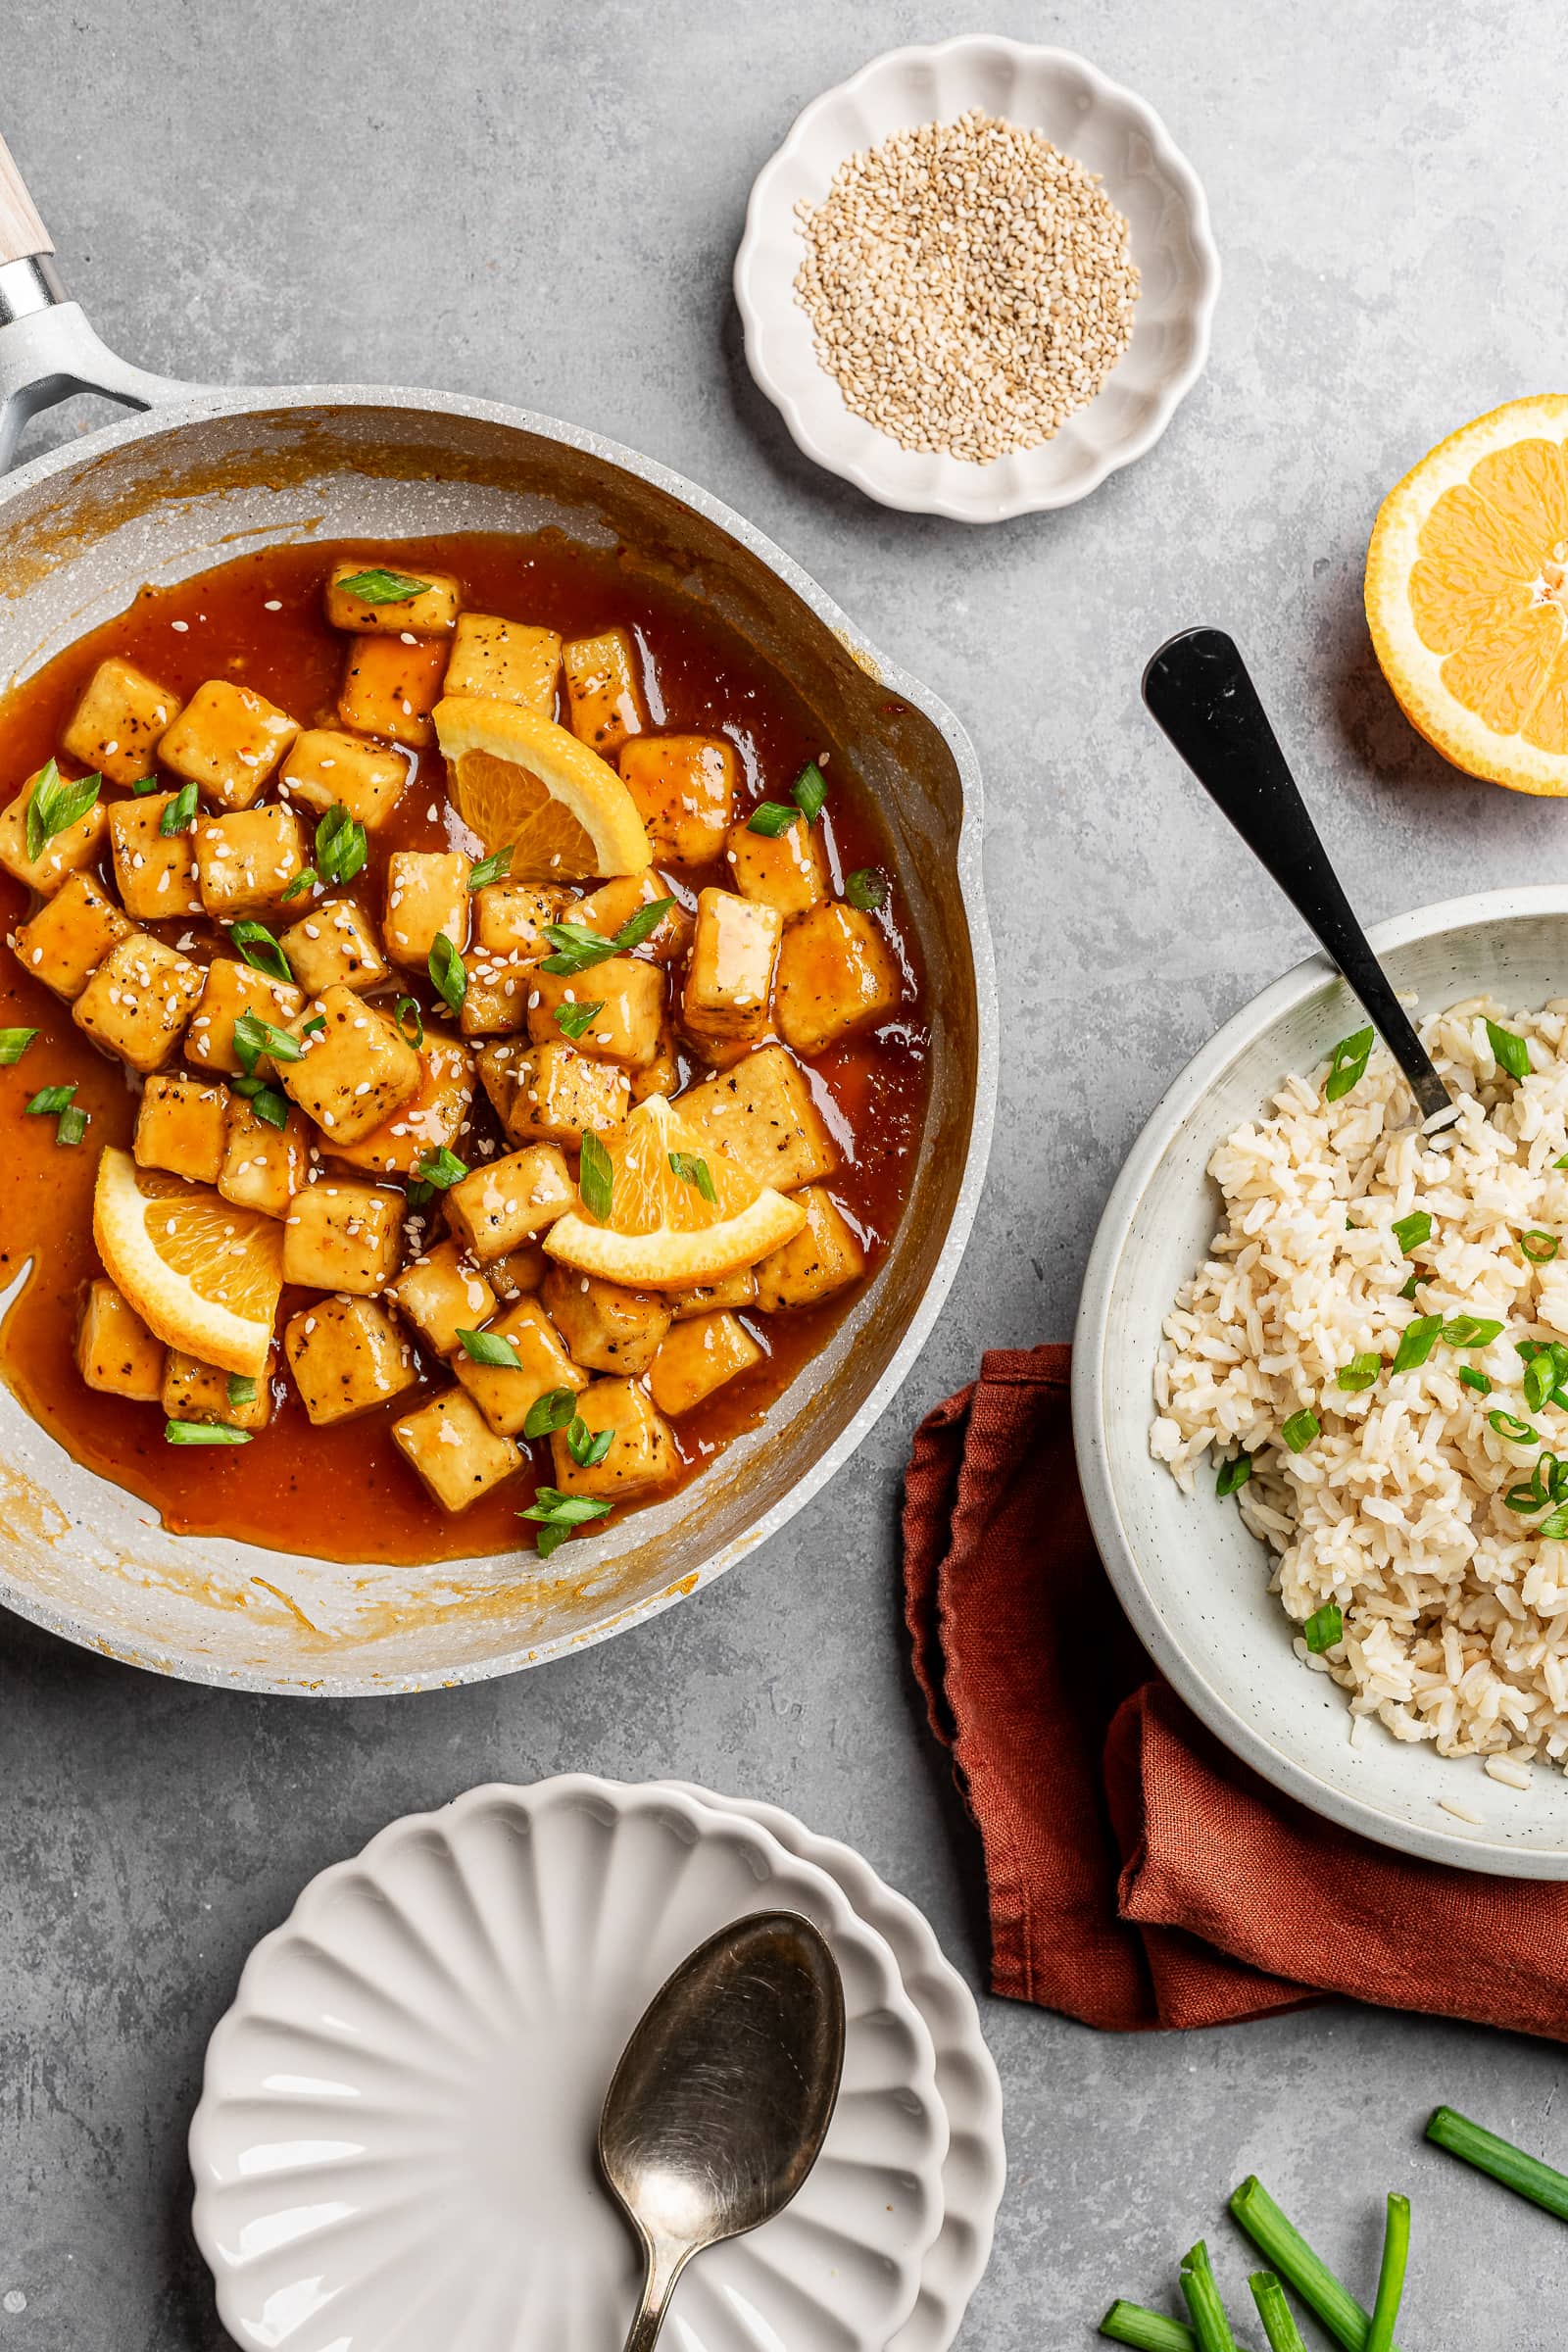 Orange tofu in a pan with a side of rice and garnished with sesame seeds and green onions.